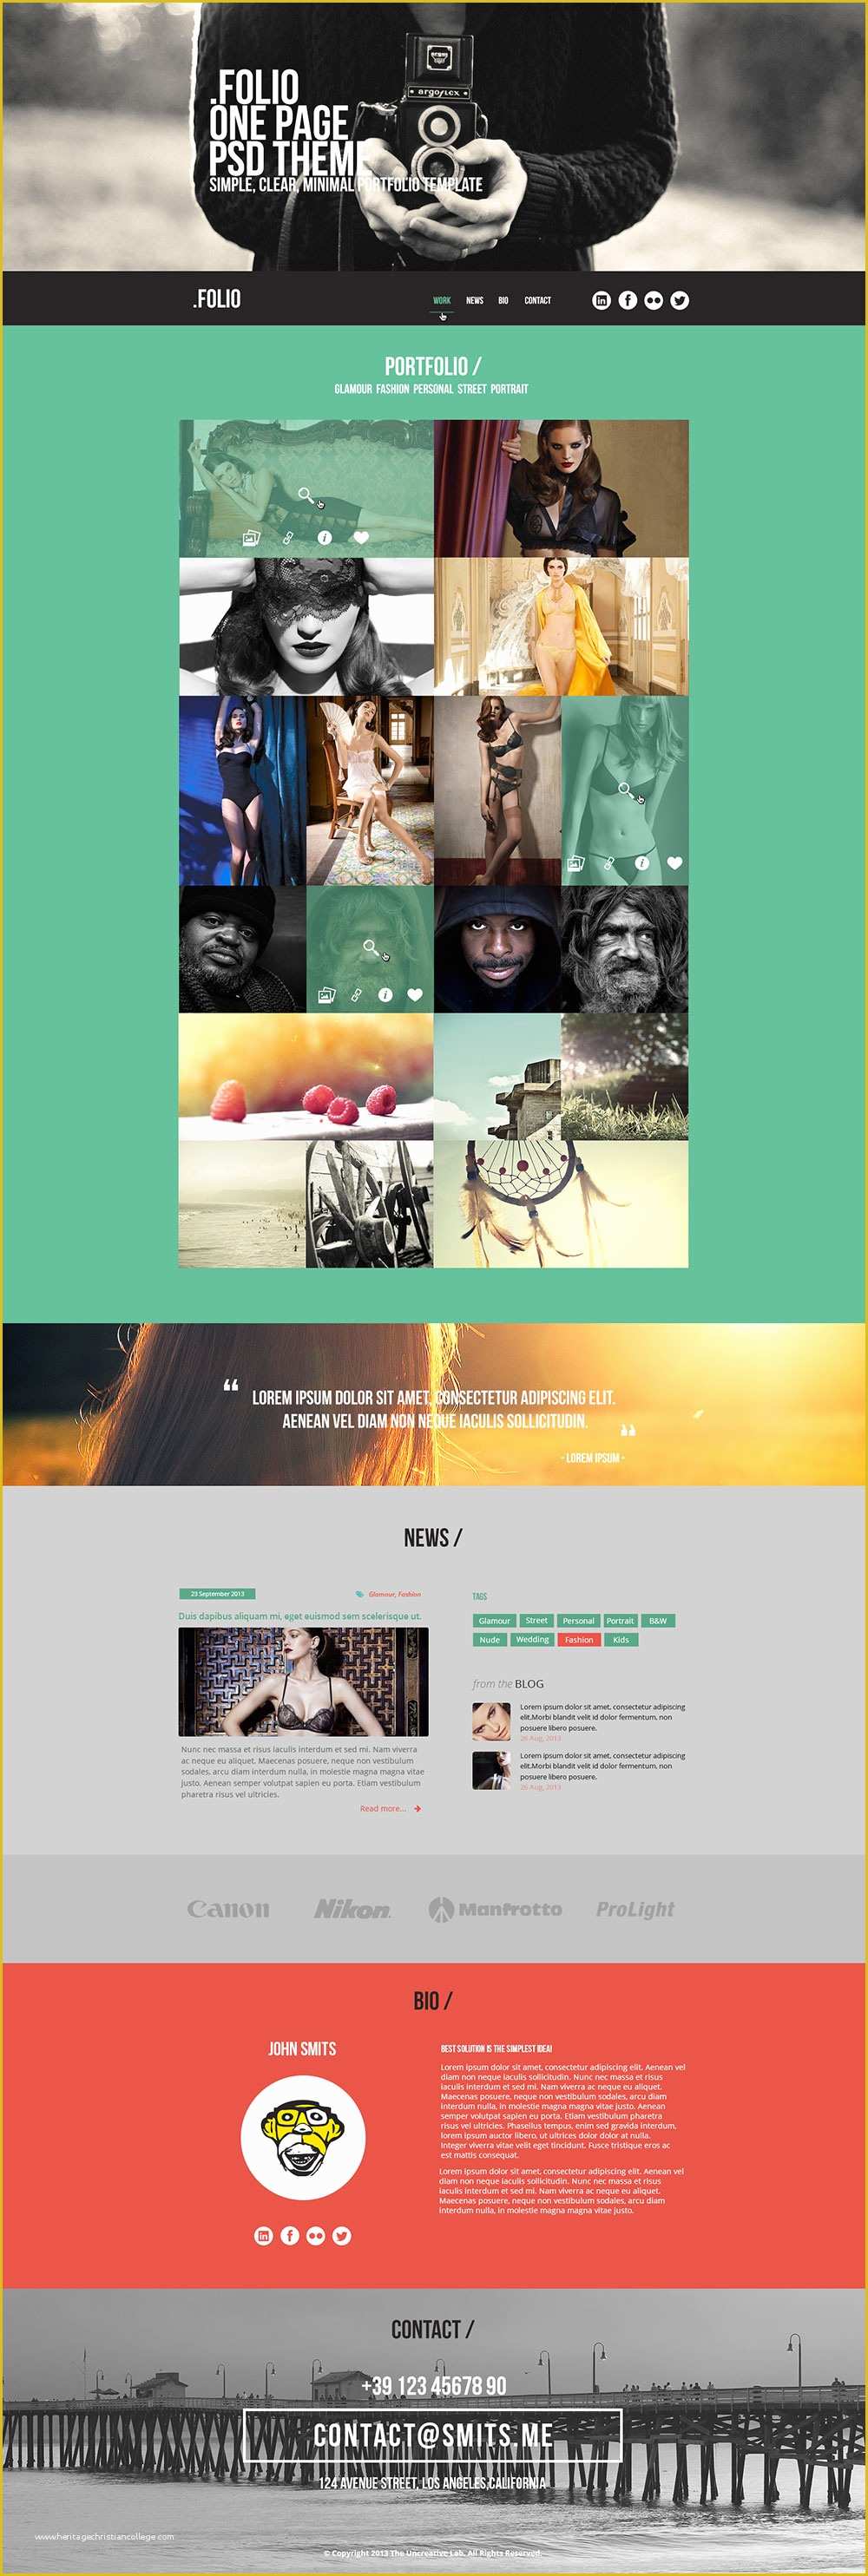 One Page Template Wordpress Free Of Folio E Page Free HTML Template